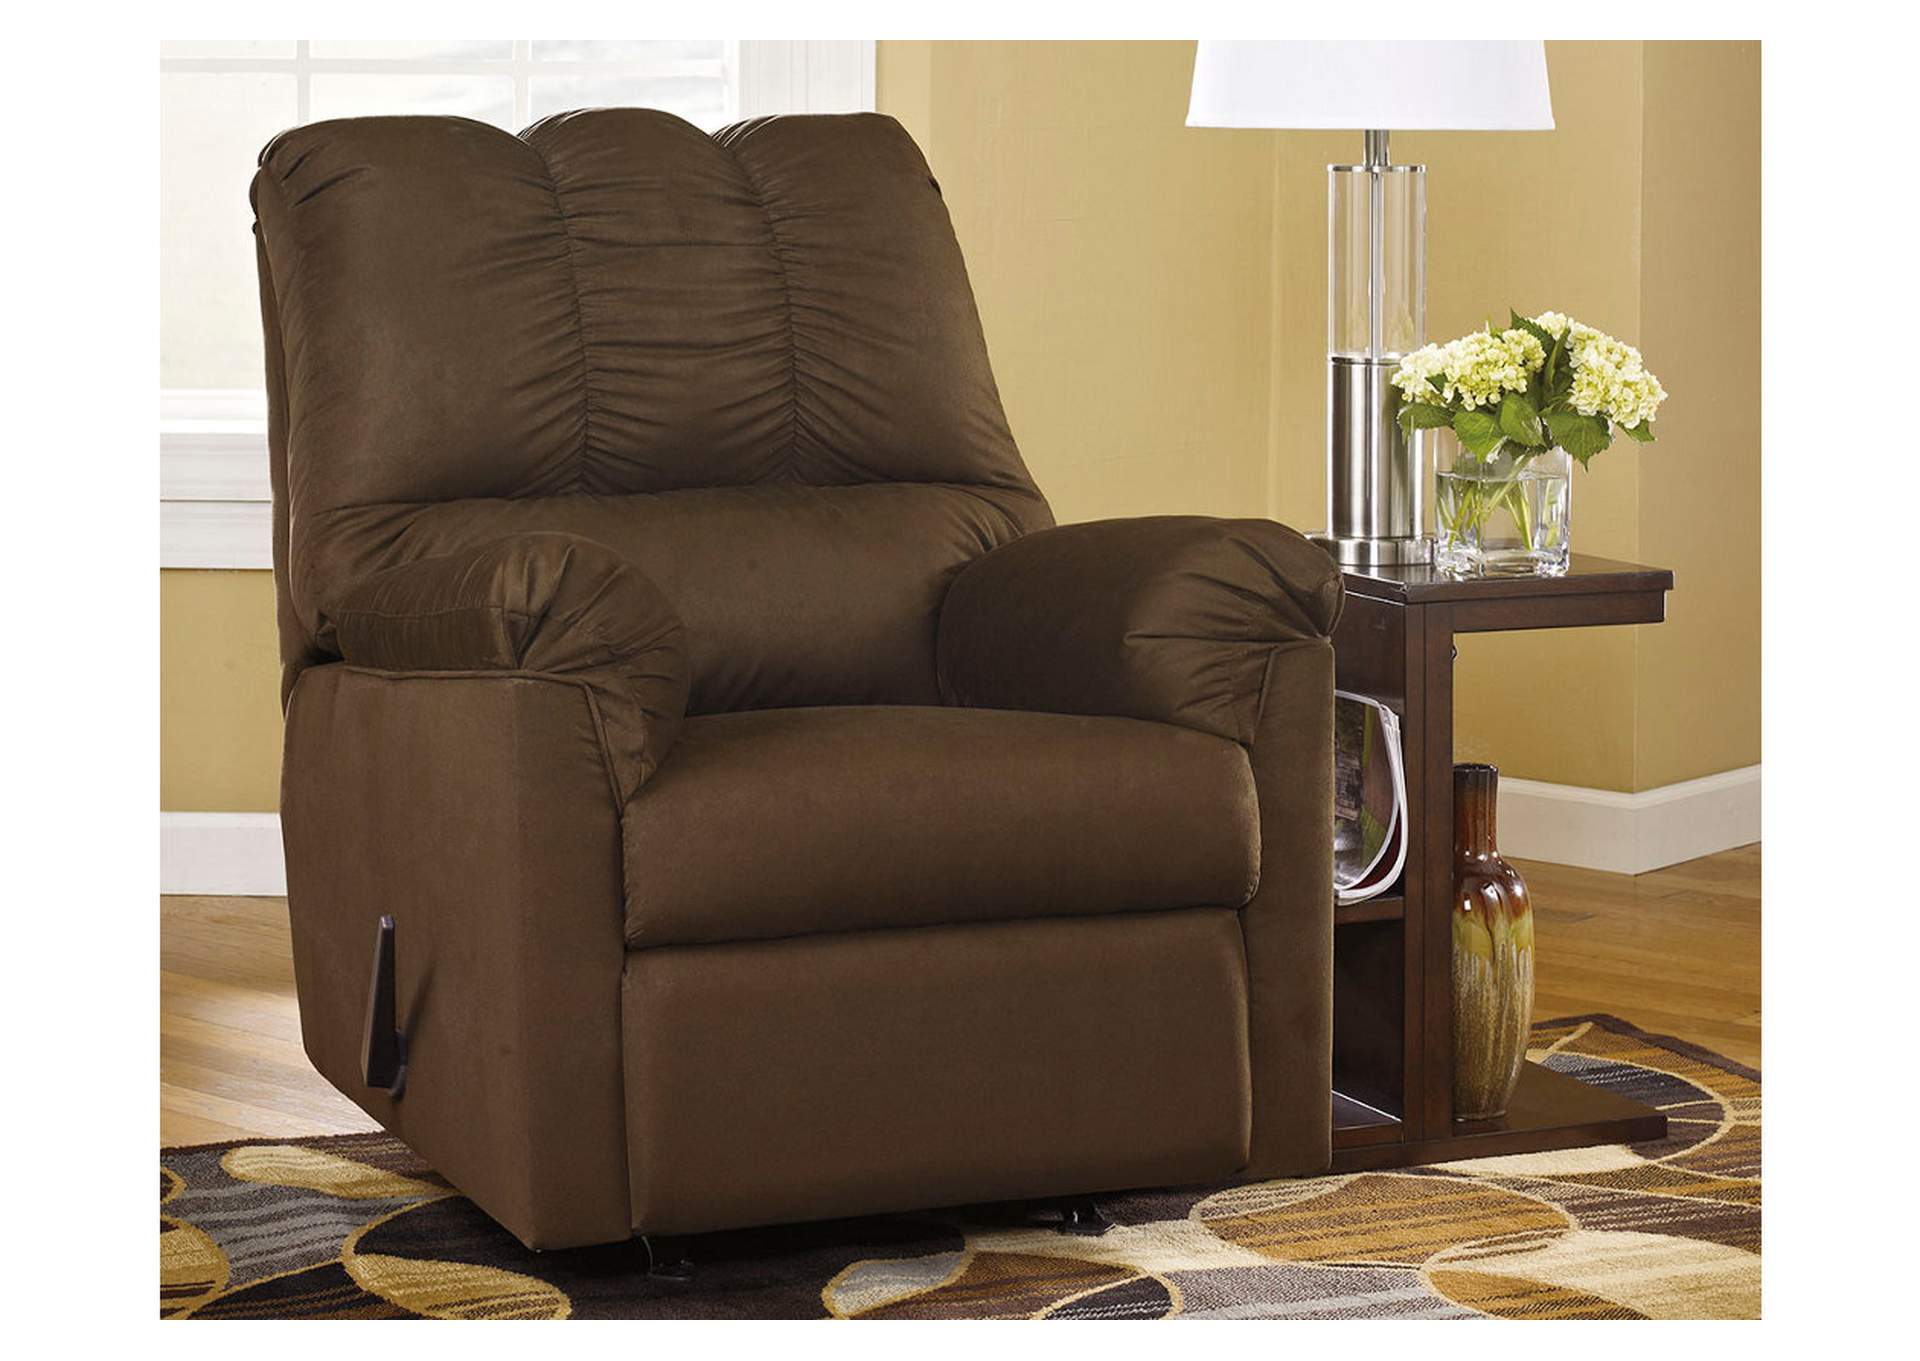 Darcy Recliner,Signature Design By Ashley